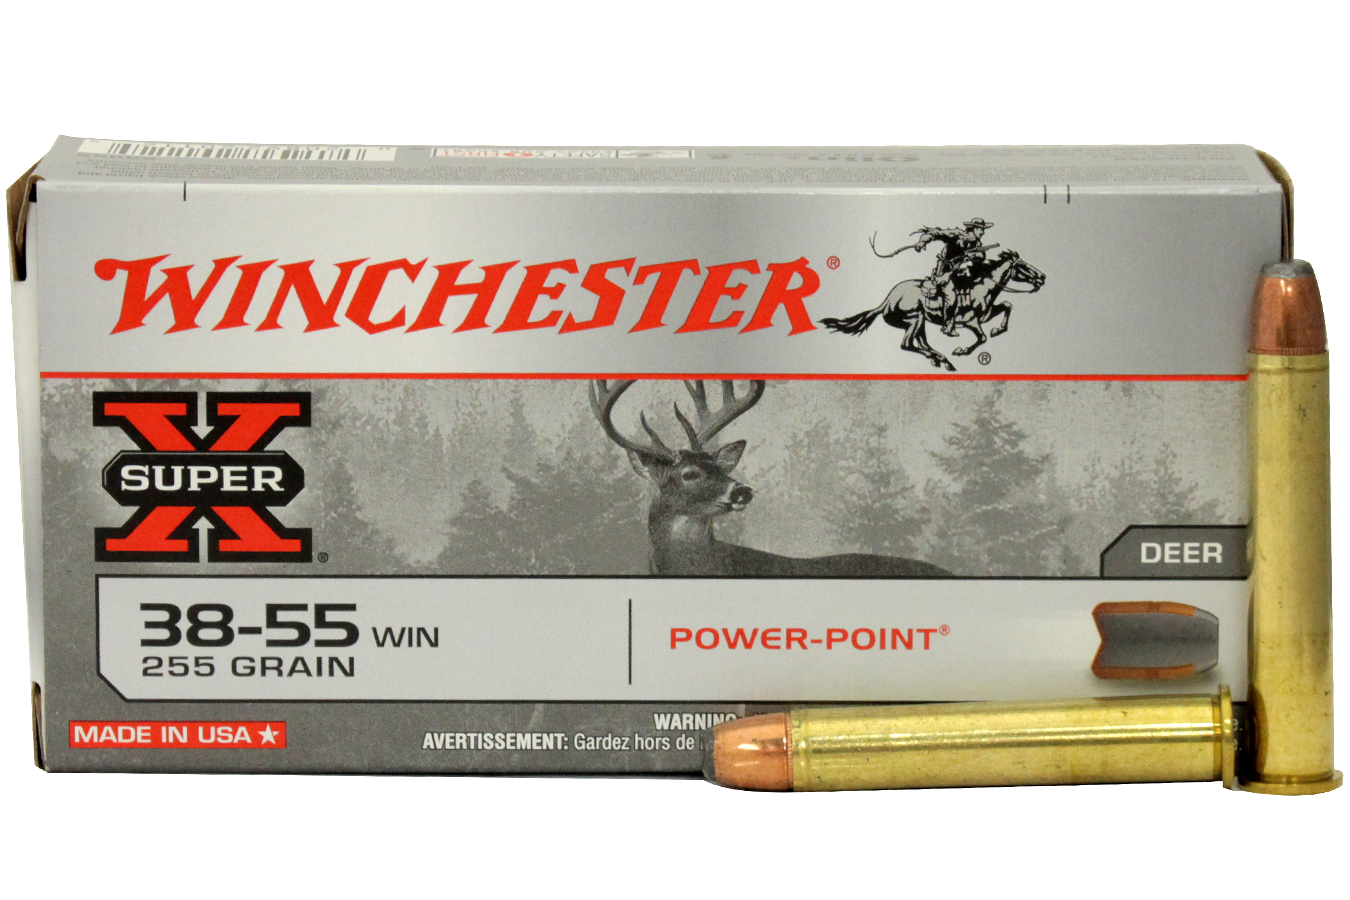 WINCHESTER AMMO 38-55 WIN 255 GR SUPER-X POWER-POINT